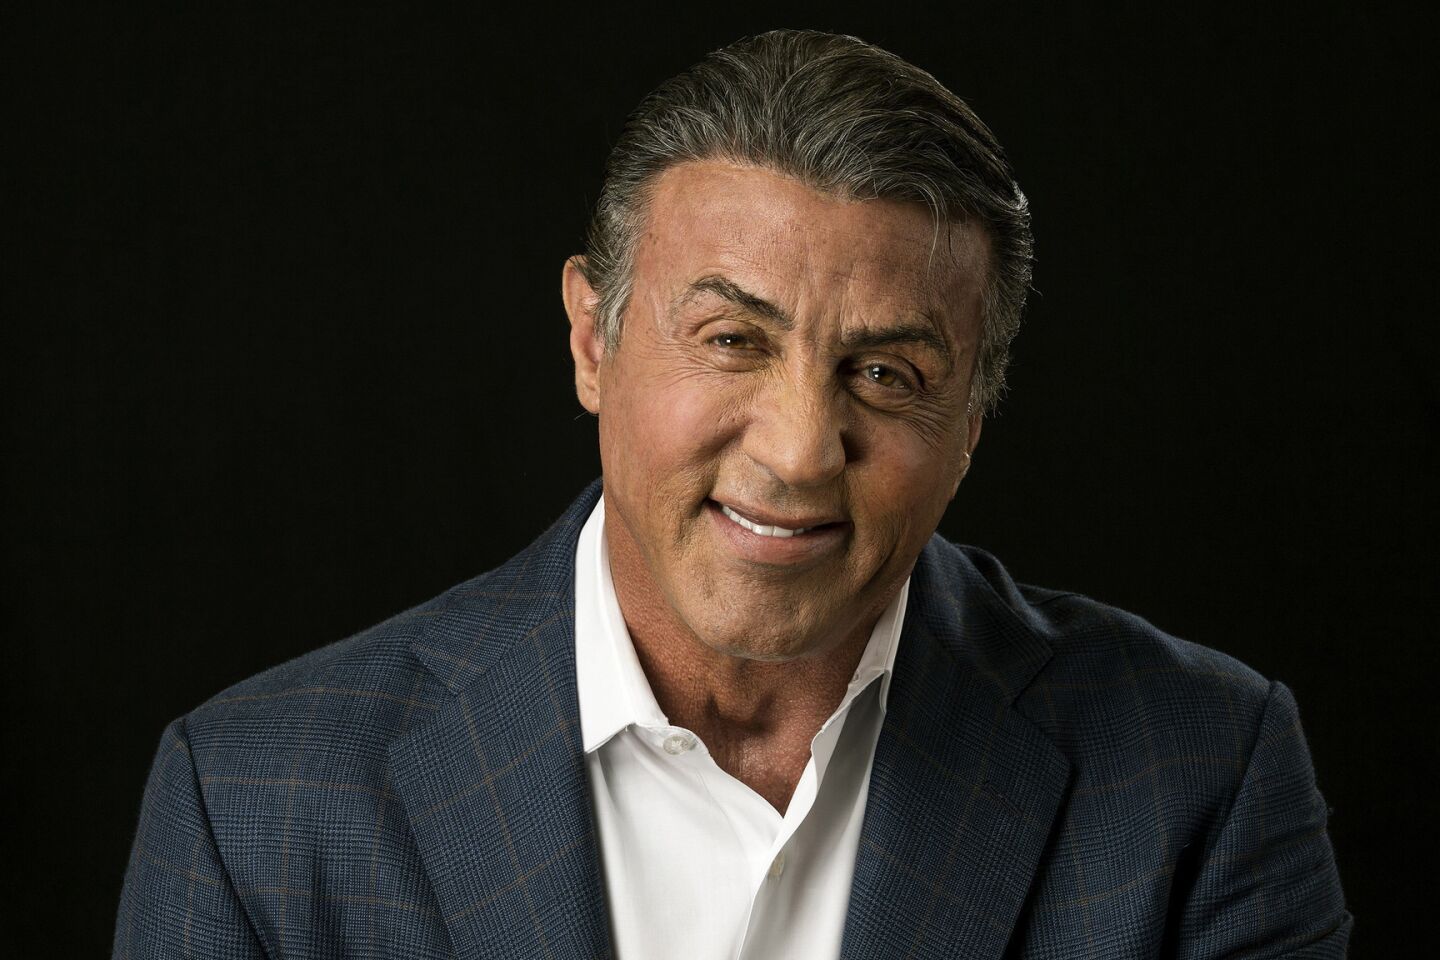 Celebrity portraits by The Times | Sylvester Stallone